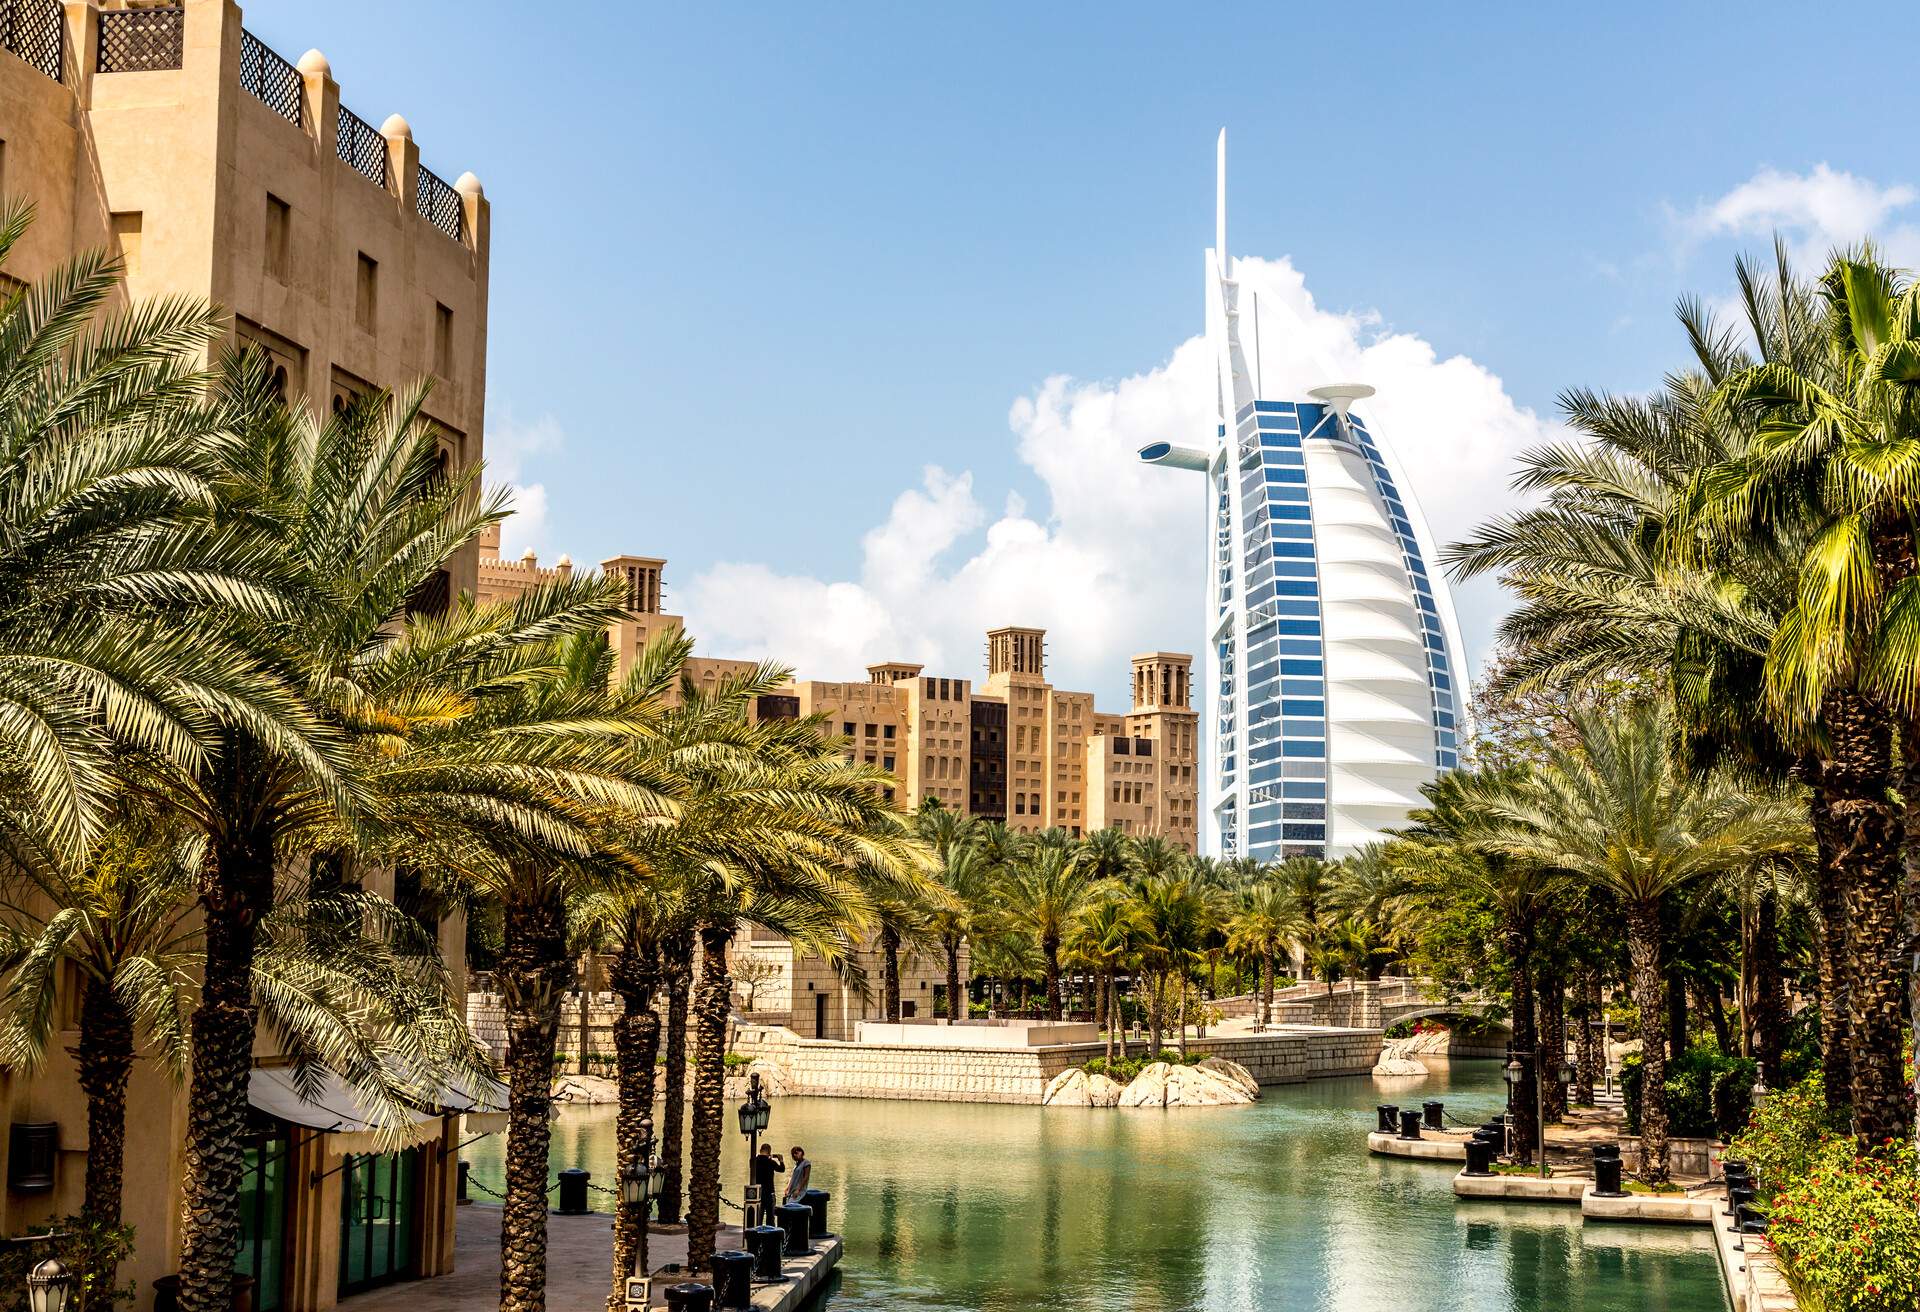 A beautiful park lake bordered by palm trees with the Burj Al Arab in the background.